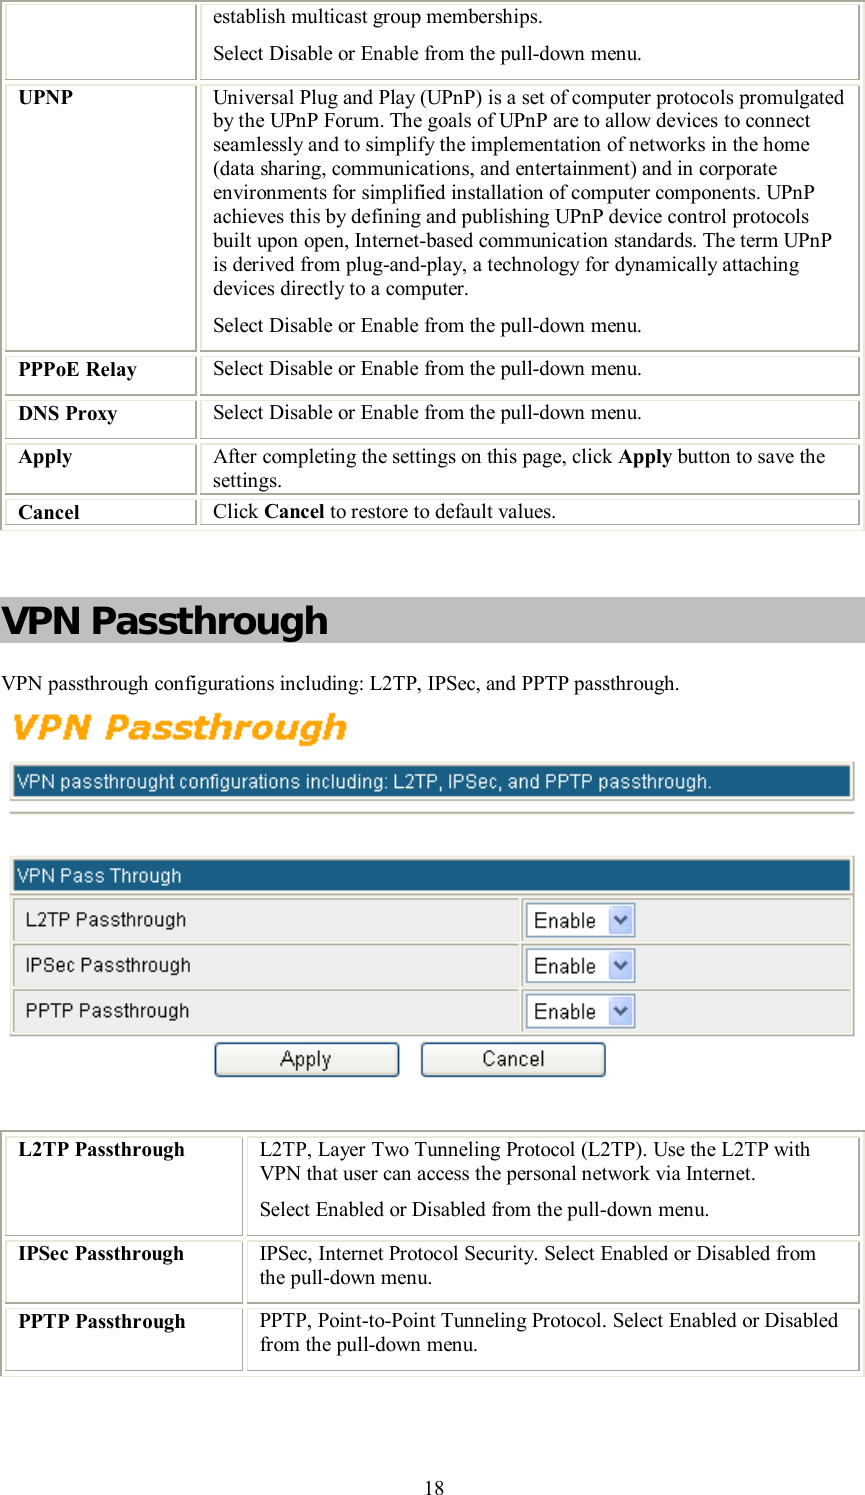    18 establish multicast group memberships. Select Disable or Enable from the pull-down menu. UPNP  Universal Plug and Play (UPnP) is a set of computer protocols promulgated by the UPnP Forum. The goals of UPnP are to allow devices to connect seamlessly and to simplify the implementation of networks in the home (data sharing, communications, and entertainment) and in corporate environments for simplified installation of computer components. UPnP achieves this by defining and publishing UPnP device control protocols built upon open, Internet-based communication standards. The term UPnP is derived from plug-and-play, a technology for dynamically attaching devices directly to a computer. Select Disable or Enable from the pull-down menu. PPPoE Relay  Select Disable or Enable from the pull-down menu. DNS Proxy  Select Disable or Enable from the pull-down menu. Apply  After completing the settings on this page, click Apply button to save the settings. Cancel  Click Cancel to restore to default values.  VPN Passthrough VPN passthrough configurations including: L2TP, IPSec, and PPTP passthrough.   L2TP Passthrough  L2TP, Layer Two Tunneling Protocol (L2TP). Use the L2TP with VPN that user can access the personal network via Internet. Select Enabled or Disabled from the pull-down menu. IPSec Passthrough  IPSec, Internet Protocol Security. Select Enabled or Disabled from the pull-down menu. PPTP Passthrough  PPTP, Point-to-Point Tunneling Protocol. Select Enabled or Disabled from the pull-down menu. 